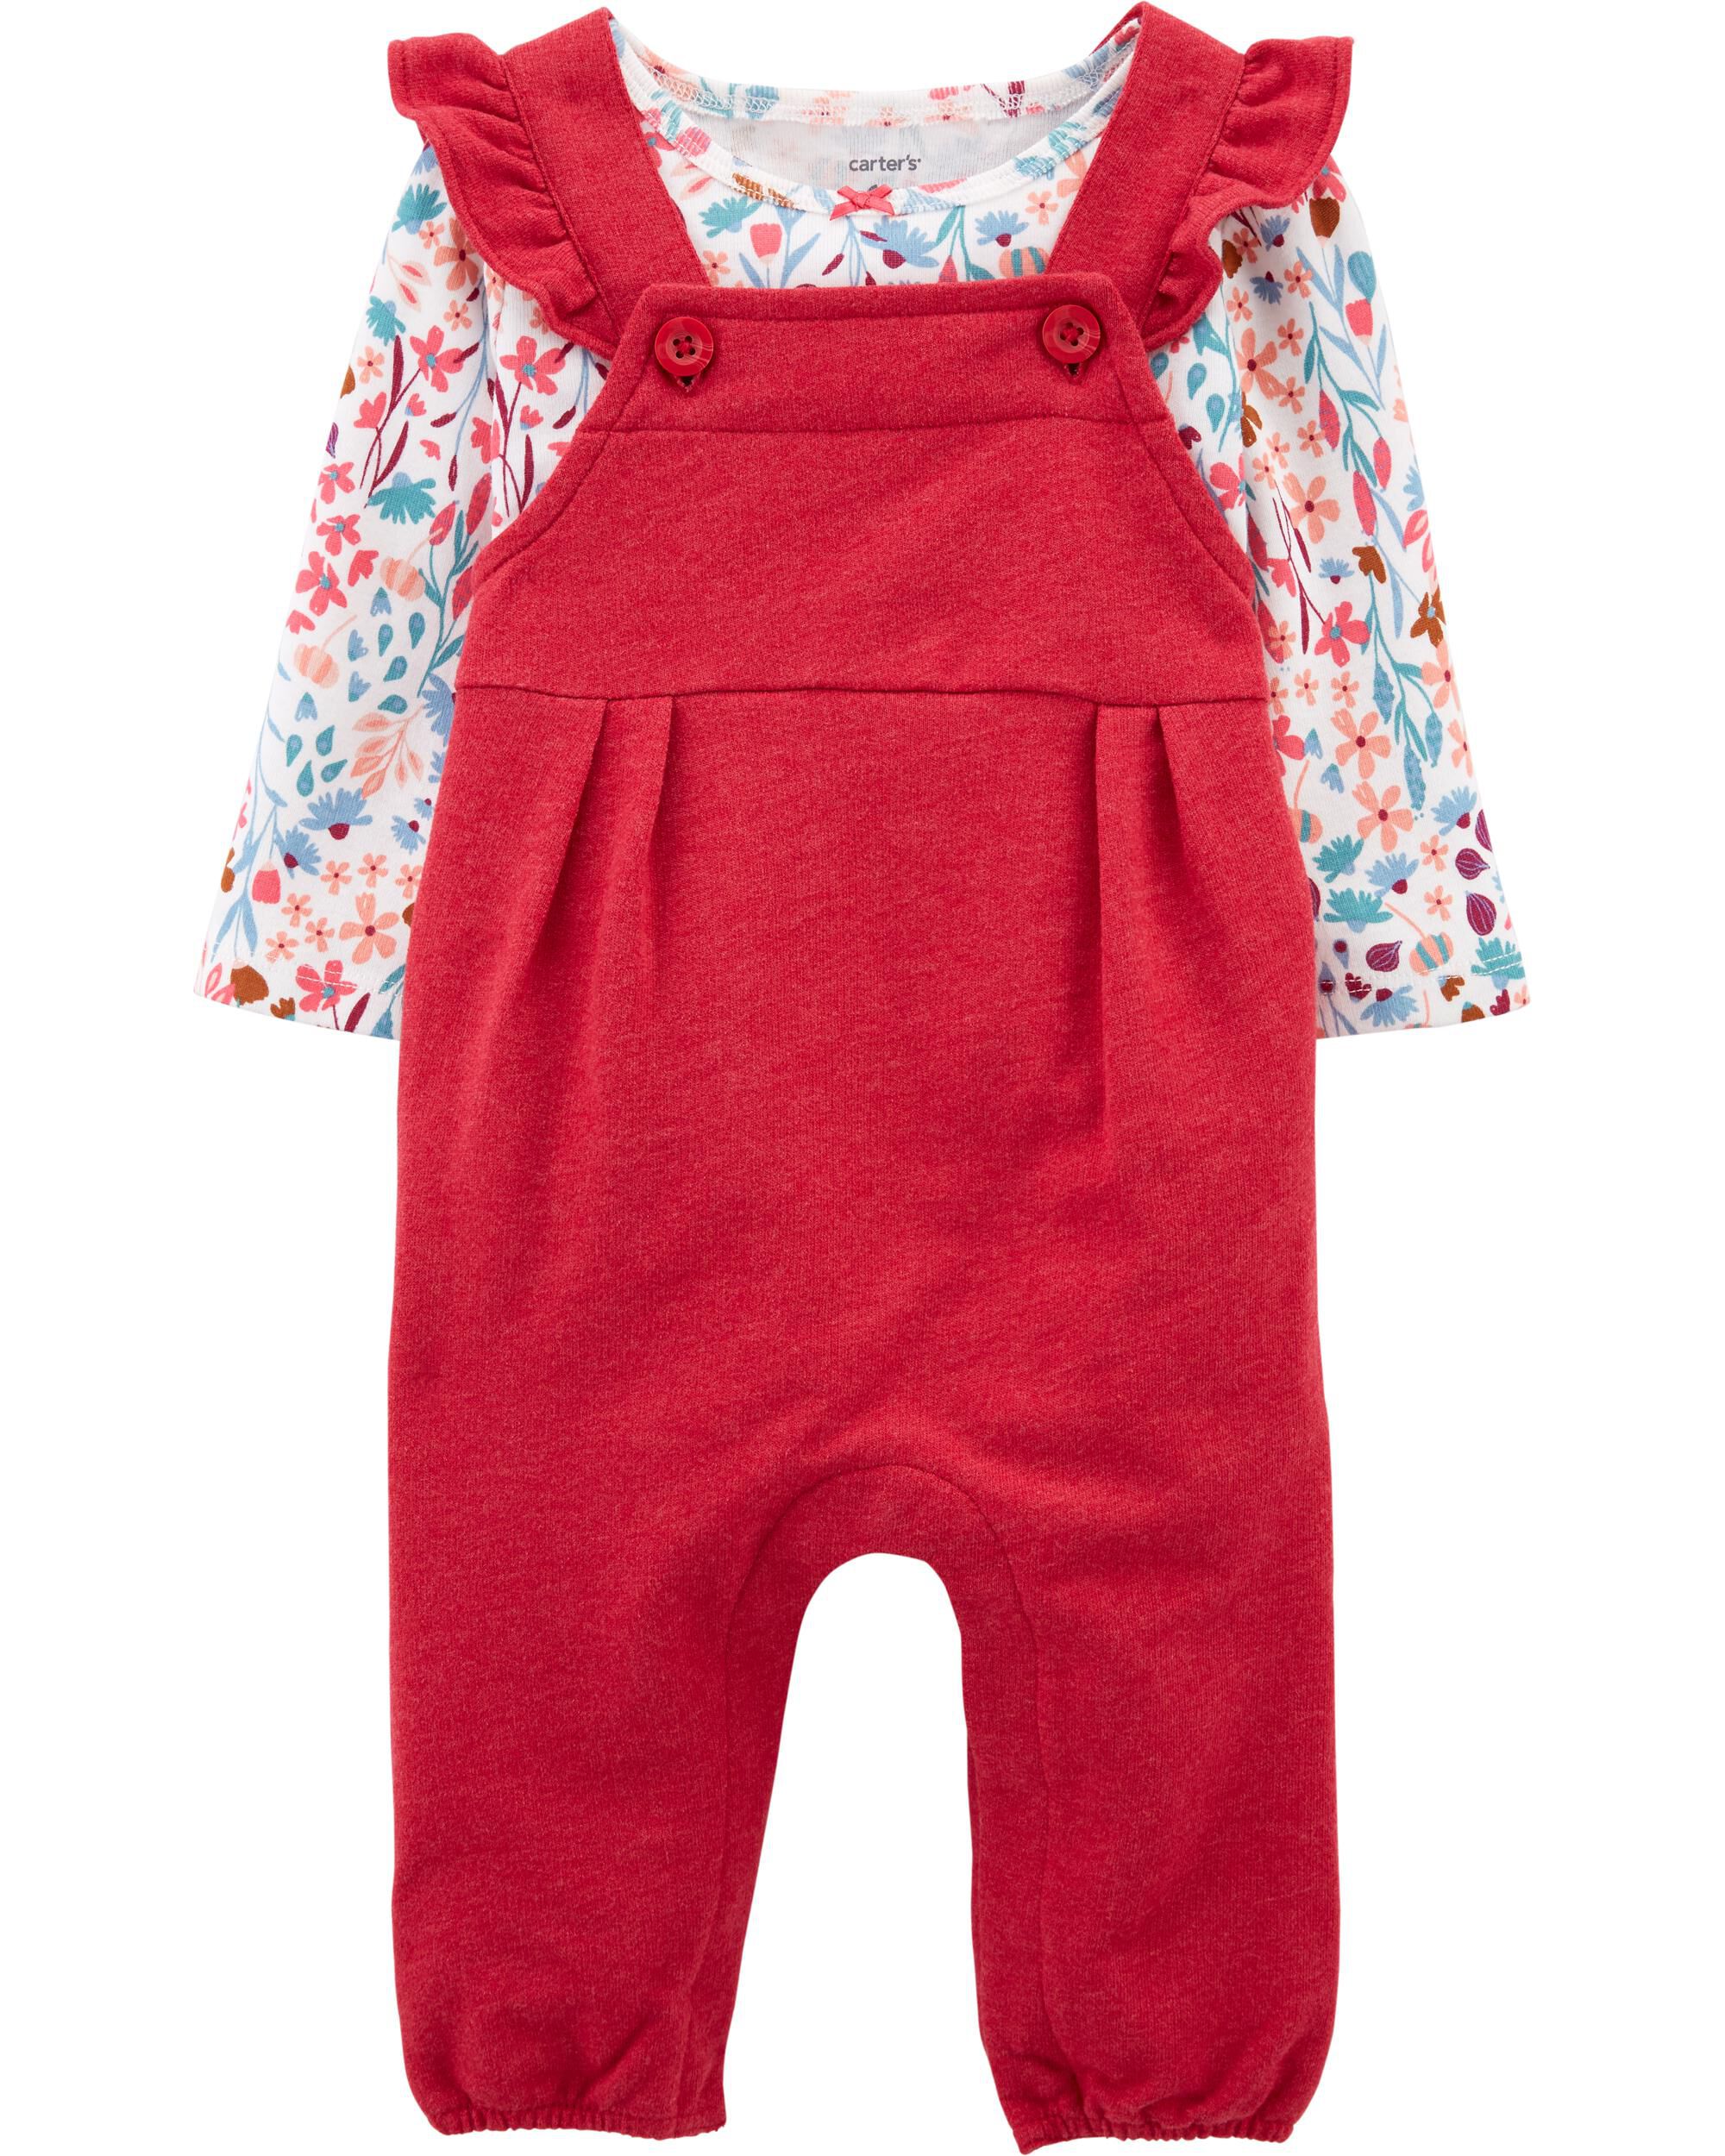 Baby Girl: Overall Sets | Carter's 